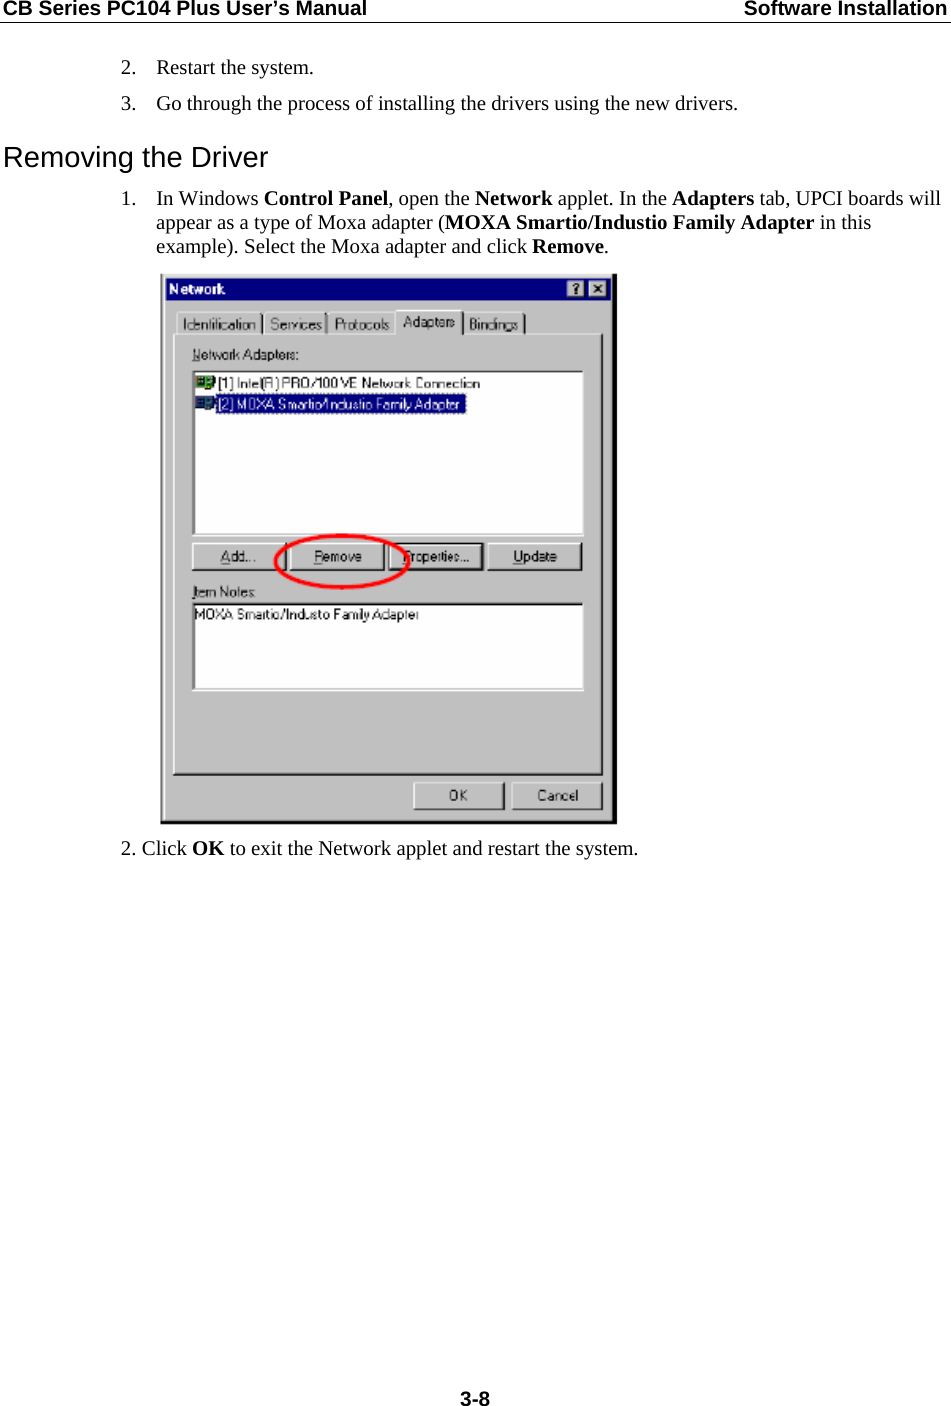 CB Series PC104 Plus User’s Manual  Software Installation 2. Restart the system. 3. Go through the process of installing the drivers using the new drivers. Removing the Driver 1. In Windows Control Panel, open the Network applet. In the Adapters tab, UPCI boards will appear as a type of Moxa adapter (MOXA Smartio/Industio Family Adapter in this example). Select the Moxa adapter and click Remove.  2. Click OK to exit the Network applet and restart the system.  3-8